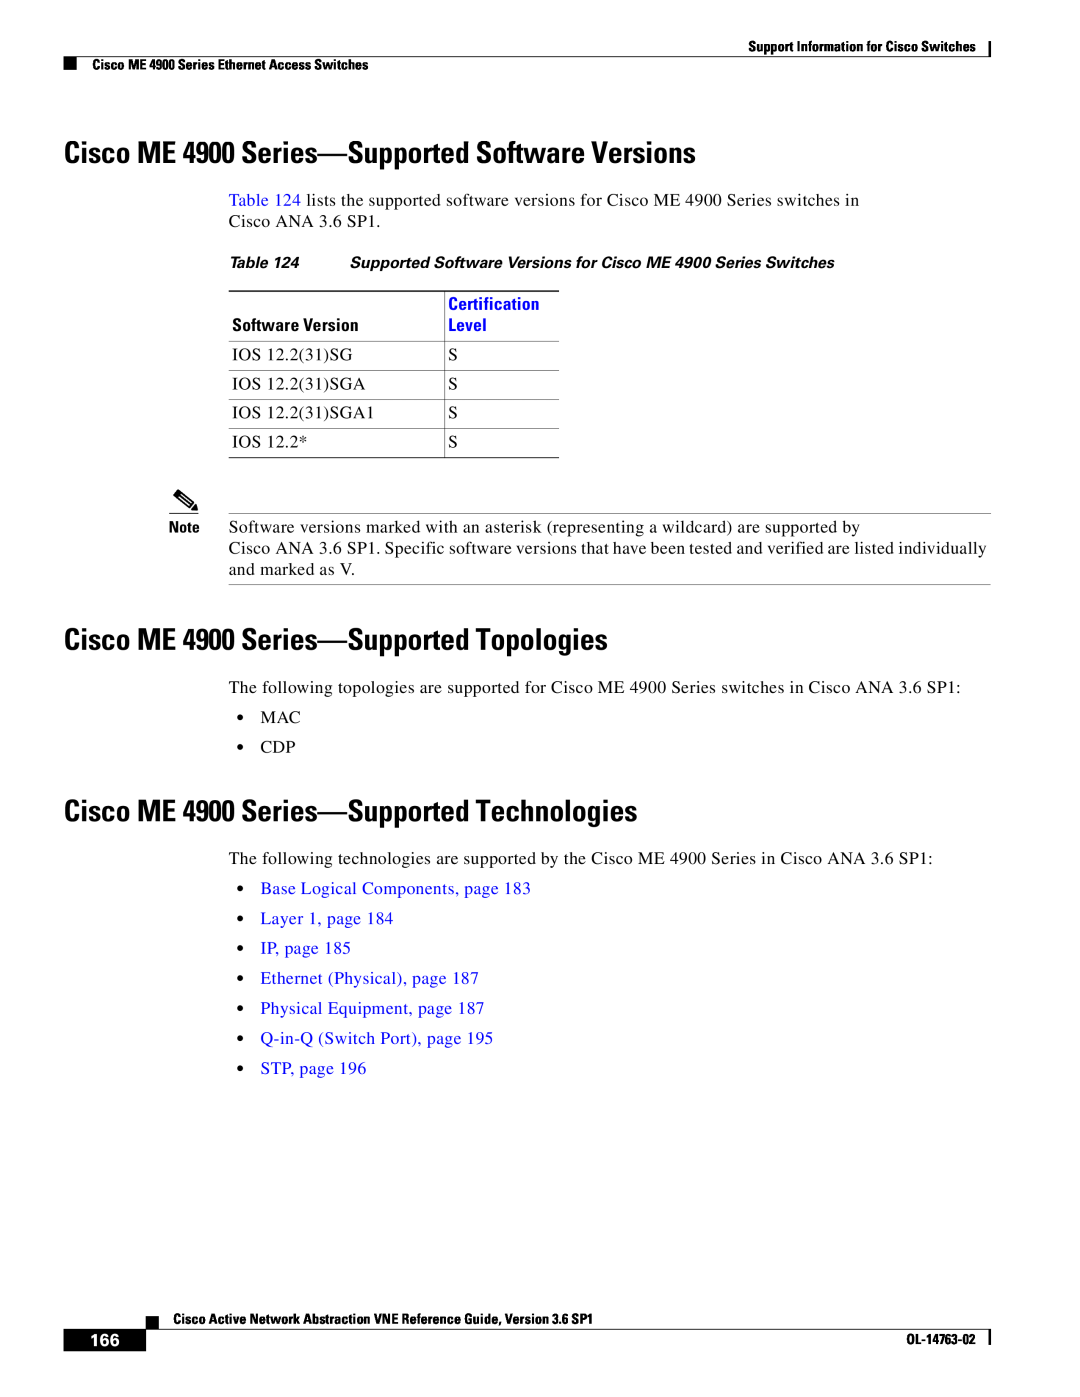 Cisco Systems OL-14763-02 Cisco ME 4900 Series-Supported Software Versions, Cisco ME 4900 Series-Supported Topologies 